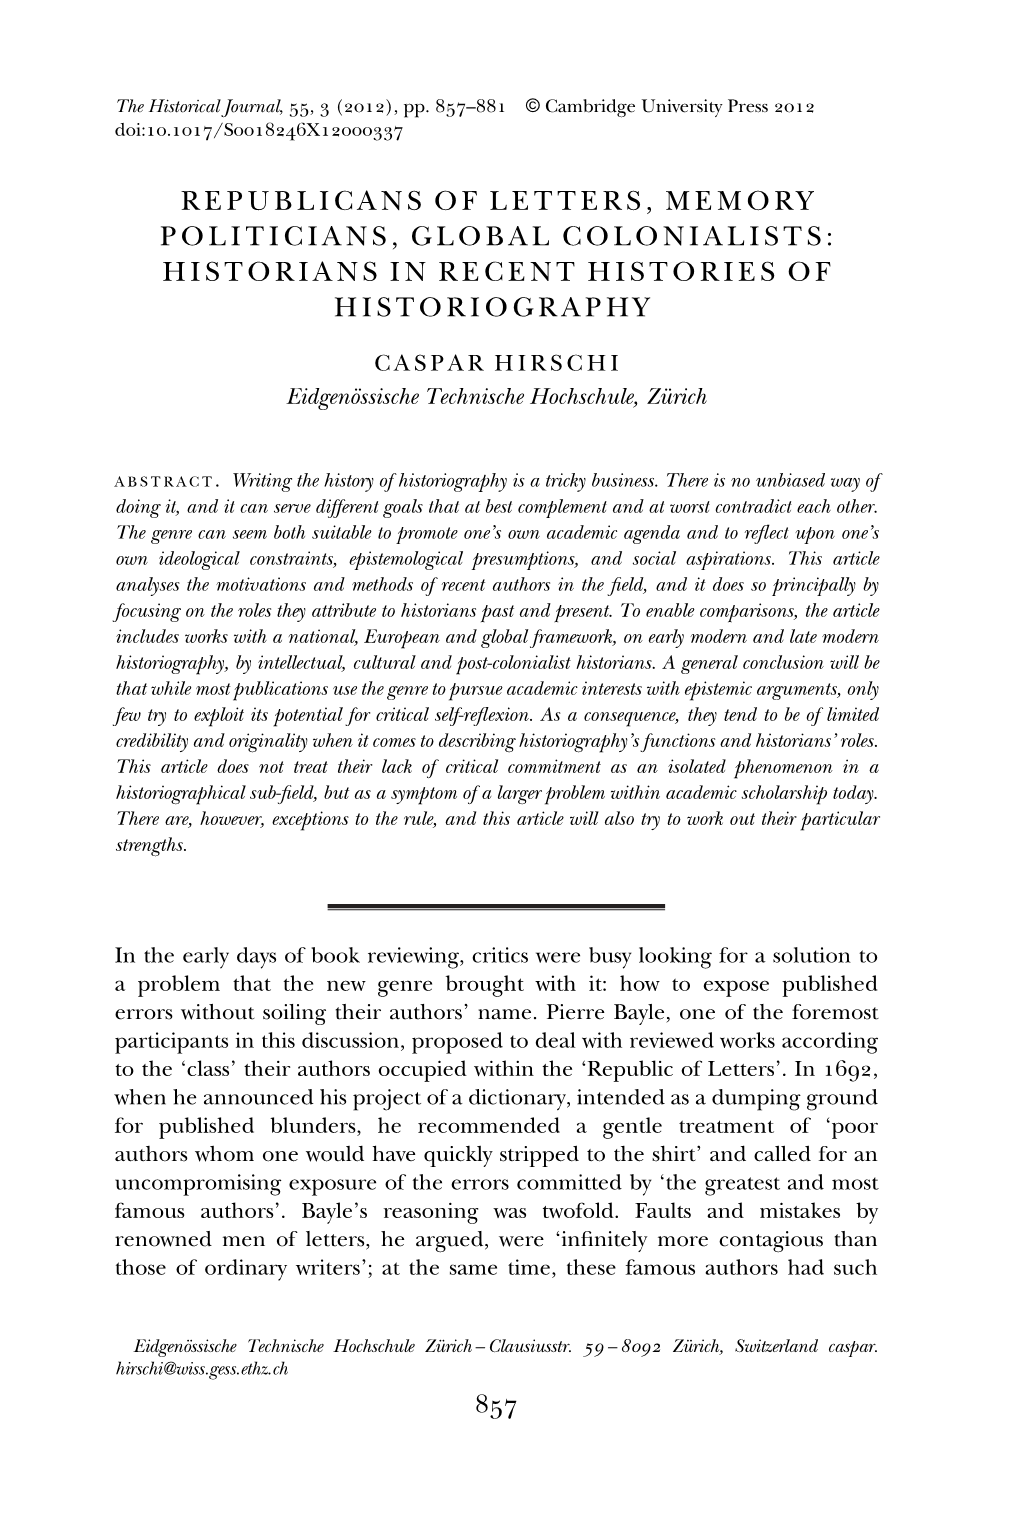 Republicans of Letters, Memory Politicians, Global Colonialists: Historians in Recent Histories of Historiography